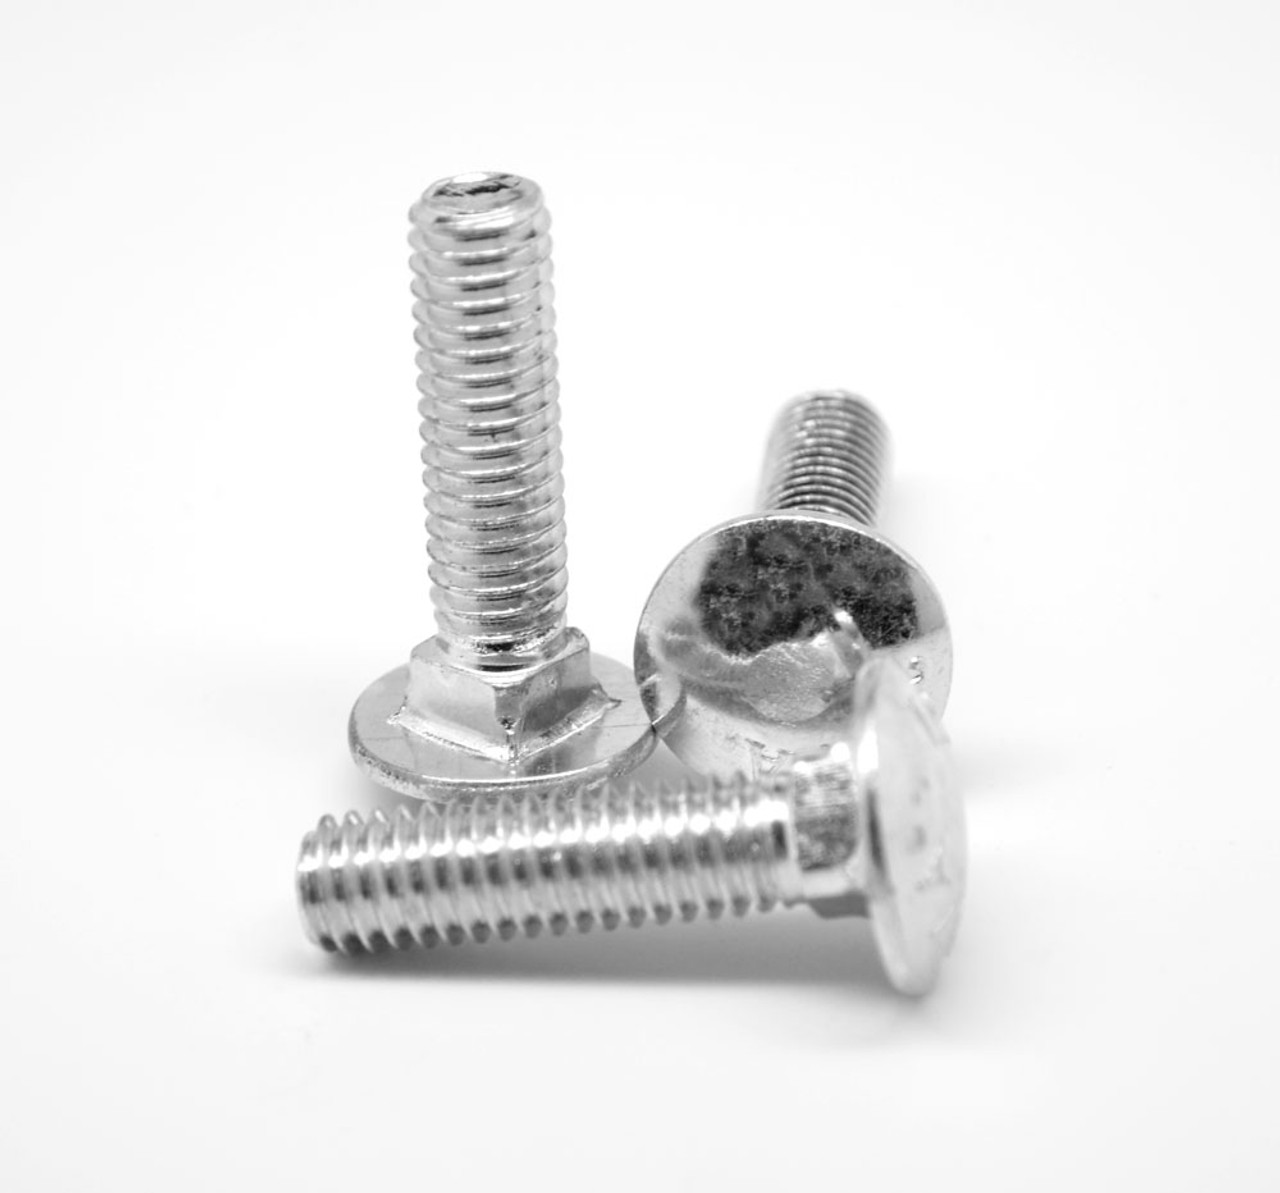 5/16"-18 x 5 1/2" (FT) Coarse Thread A307 Grade A Carriage Bolt Low Carbon Steel Zinc Plated